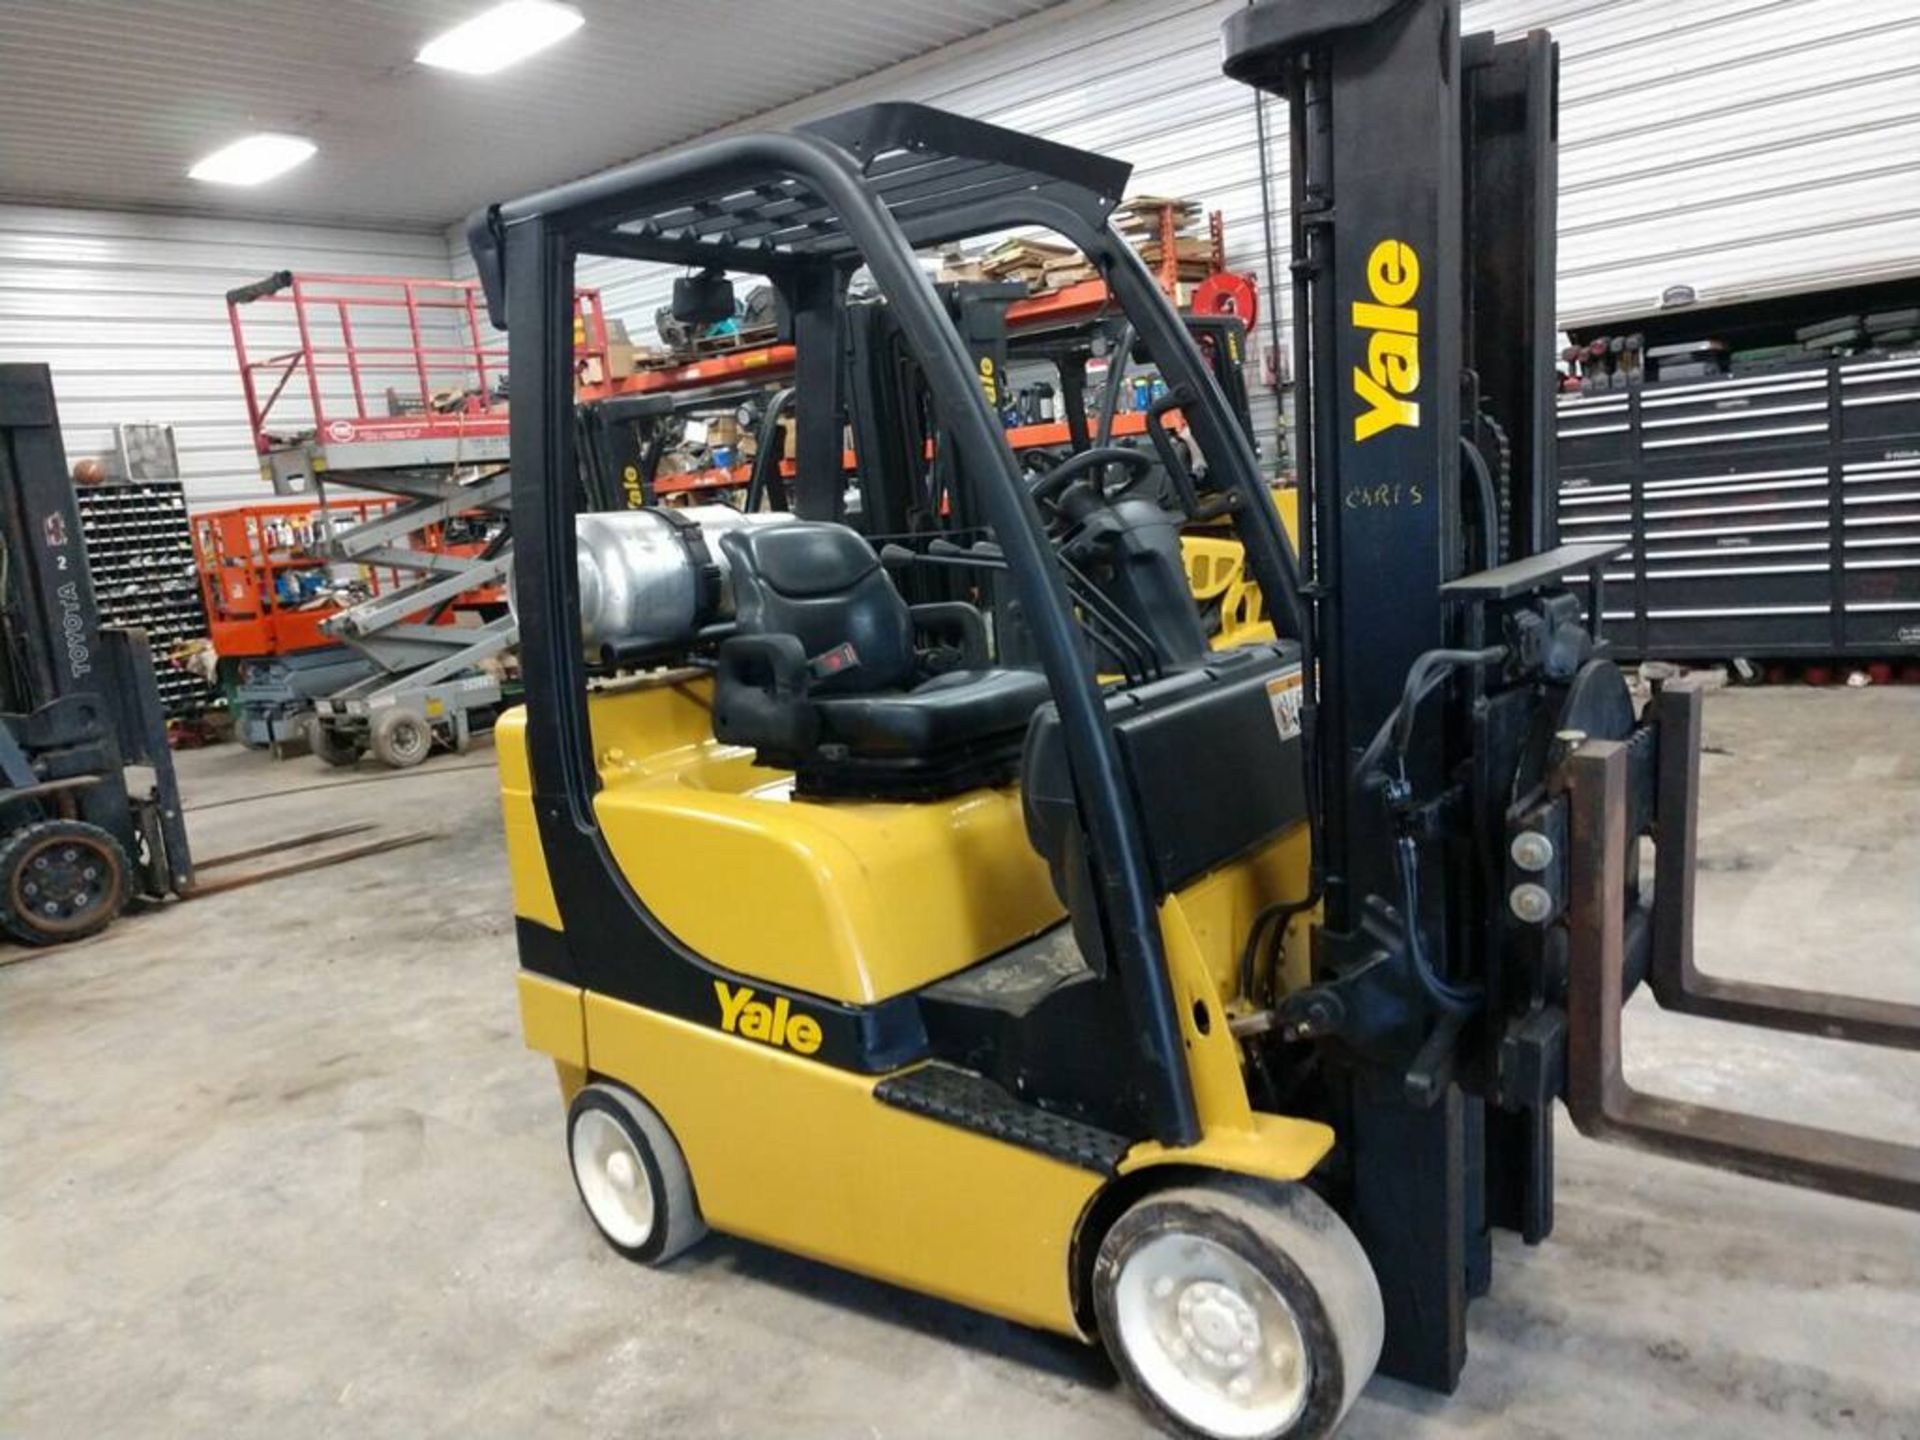 2009 YALE 3,500-LB. CAP. LPG FORKLIFT, MODEL: GLC035VX, SOLID TIRES, 2-STAGE, WITH CASCADE ROTATOR - Image 2 of 4